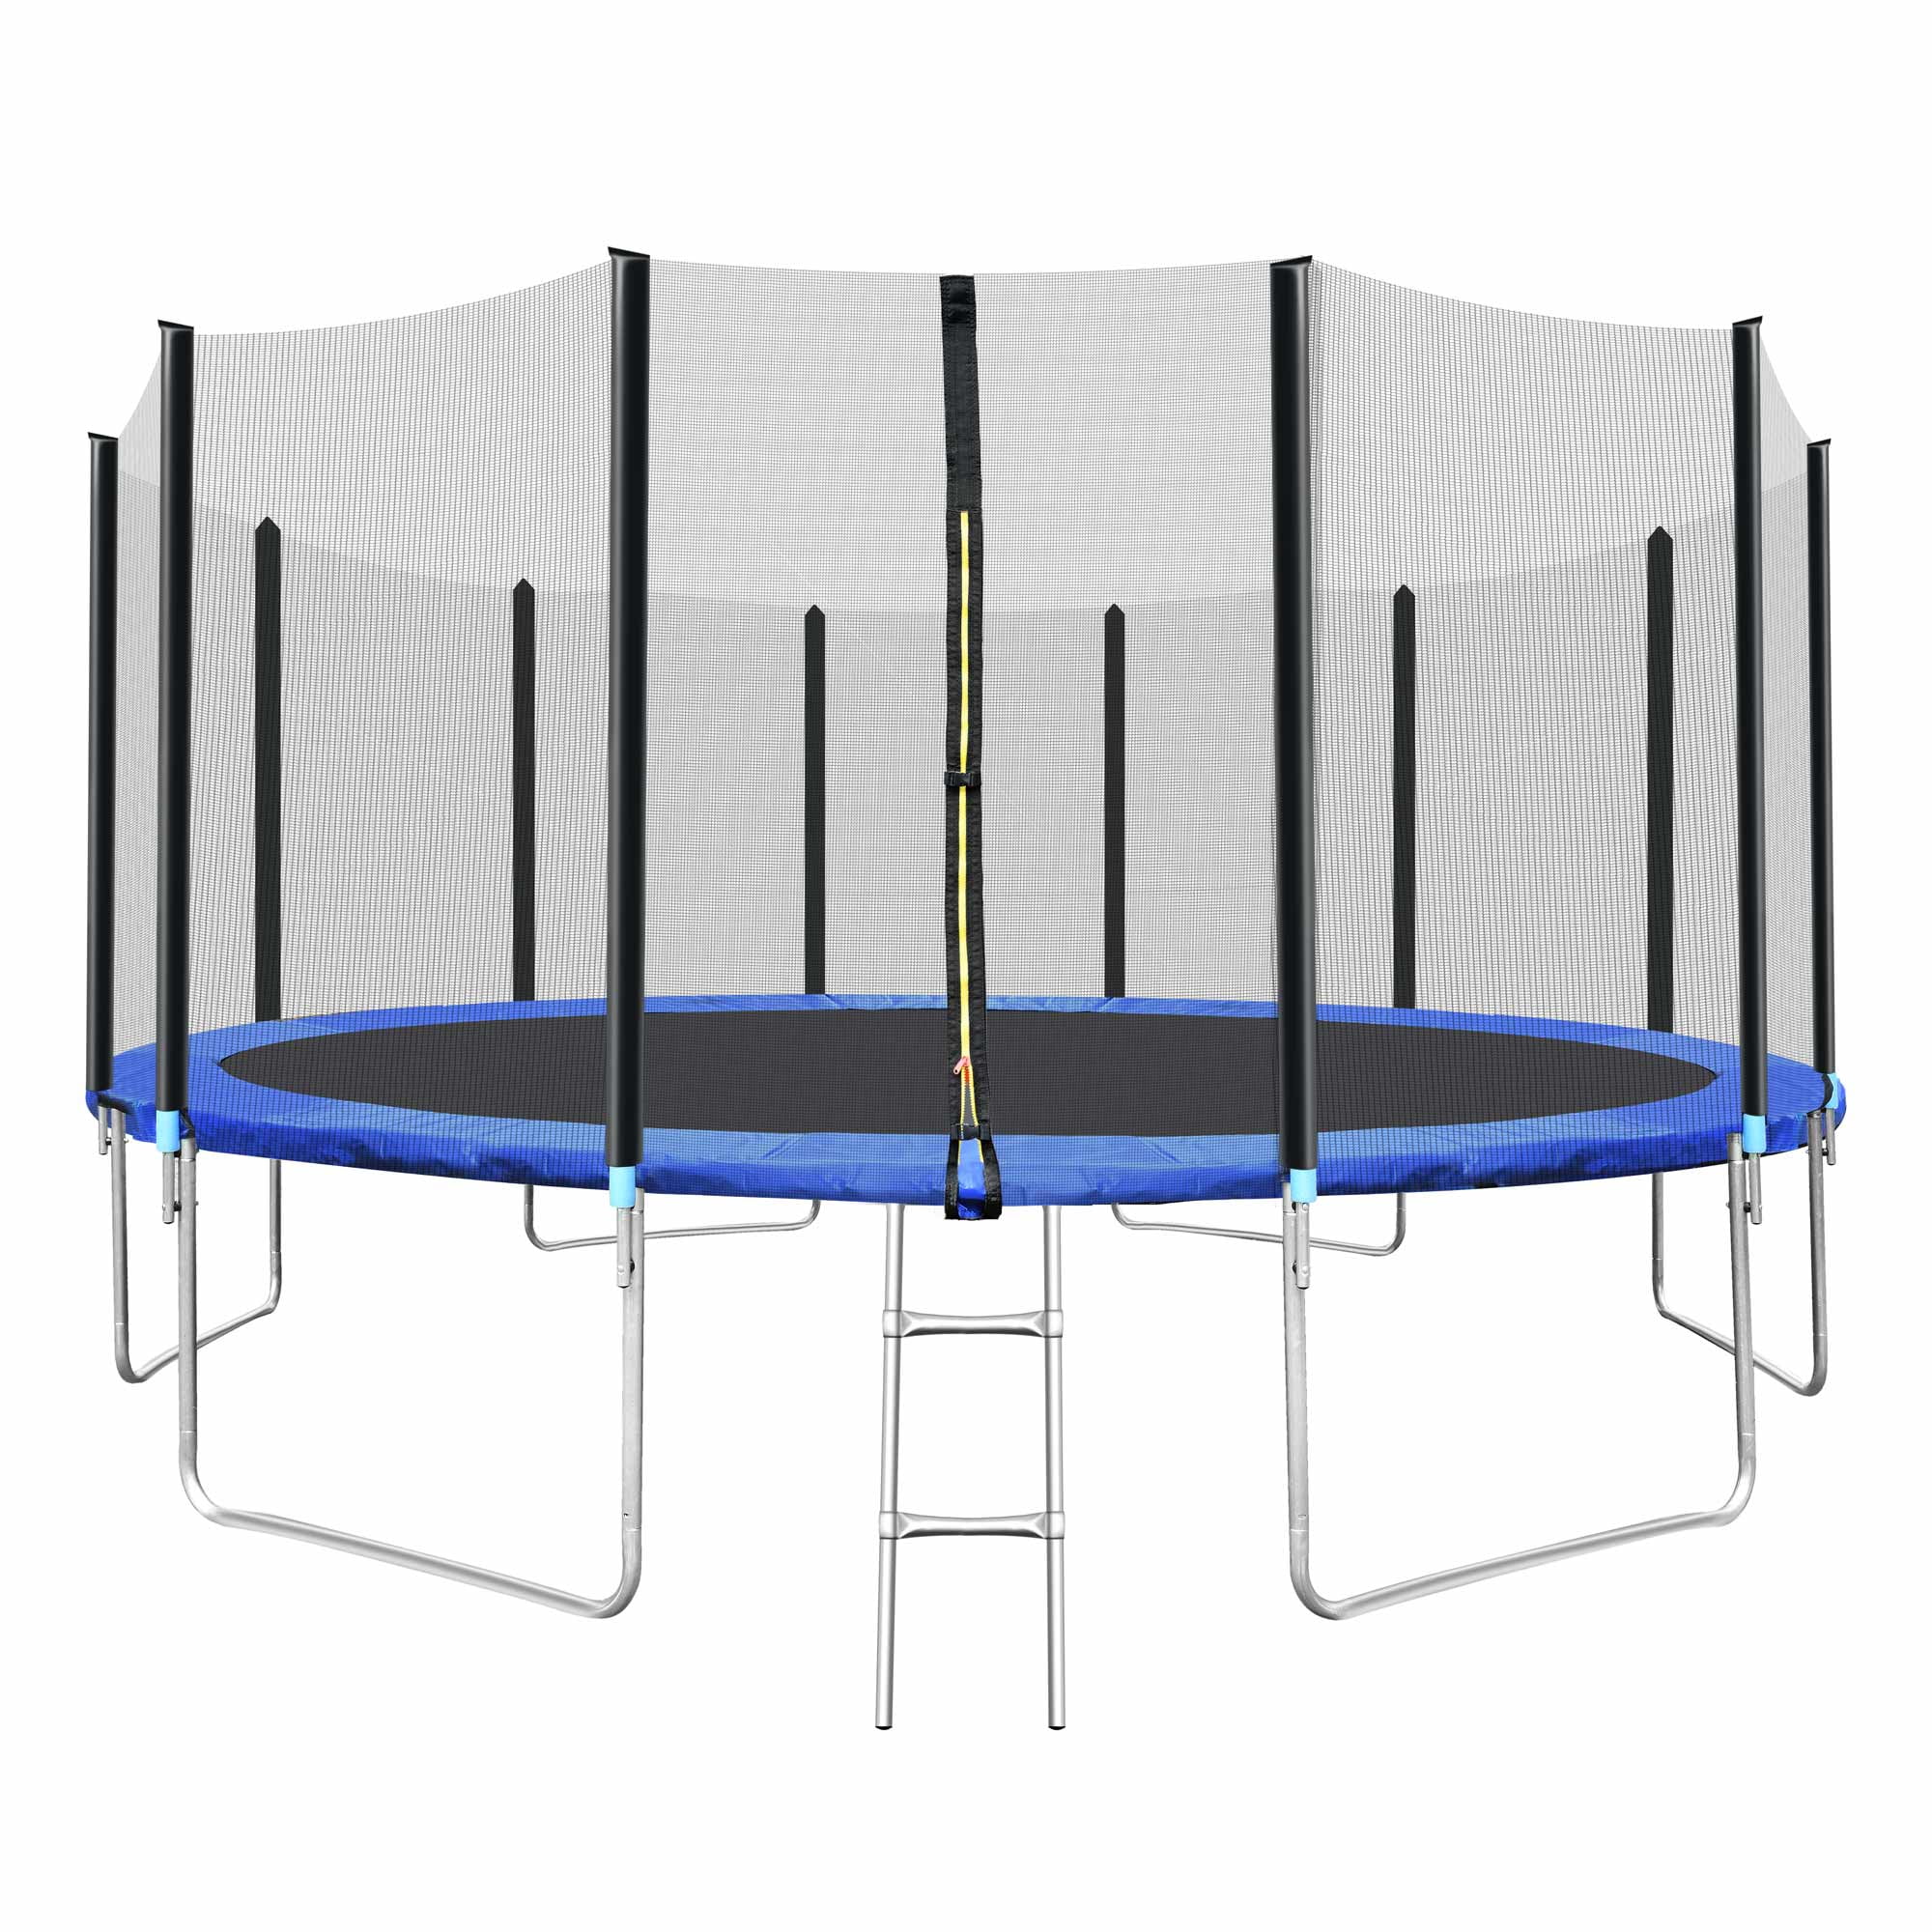 Trampoline 16 FT with Safe Enclosure Net, Kids Trampoline for Play &amp; Exercise Indoor or Outdoor, Waterproof Jump Mat, Backyard Trampoline Ladder for Adults Fitness Equipment